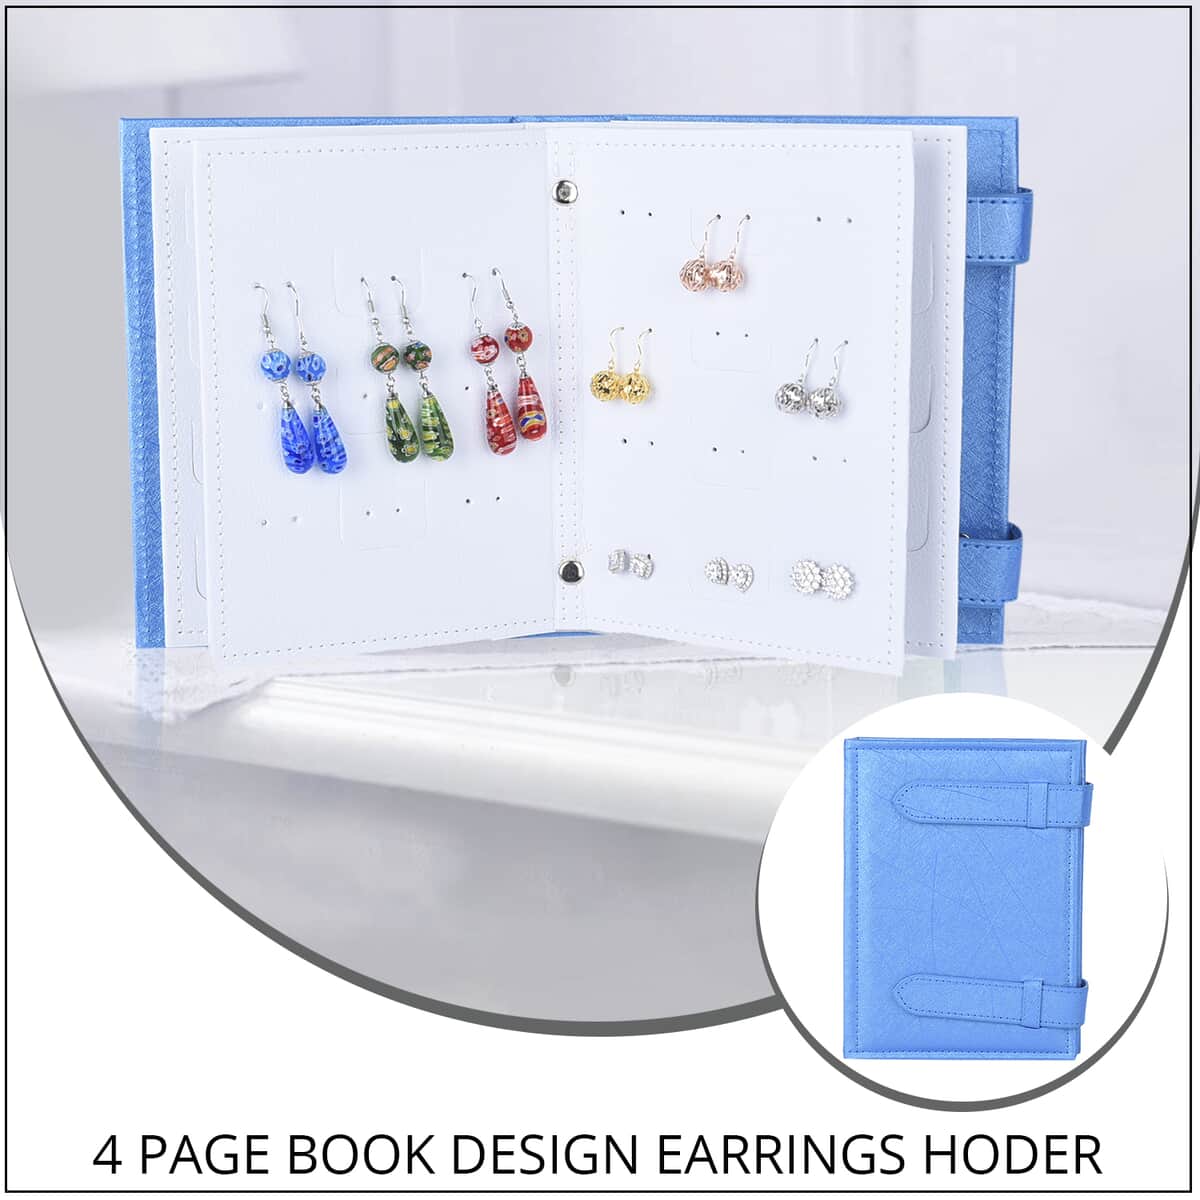 Blue Faux Leather 4 Page Book Design Earrings Hoder (7.28"x5.31"x1.57") image number 1